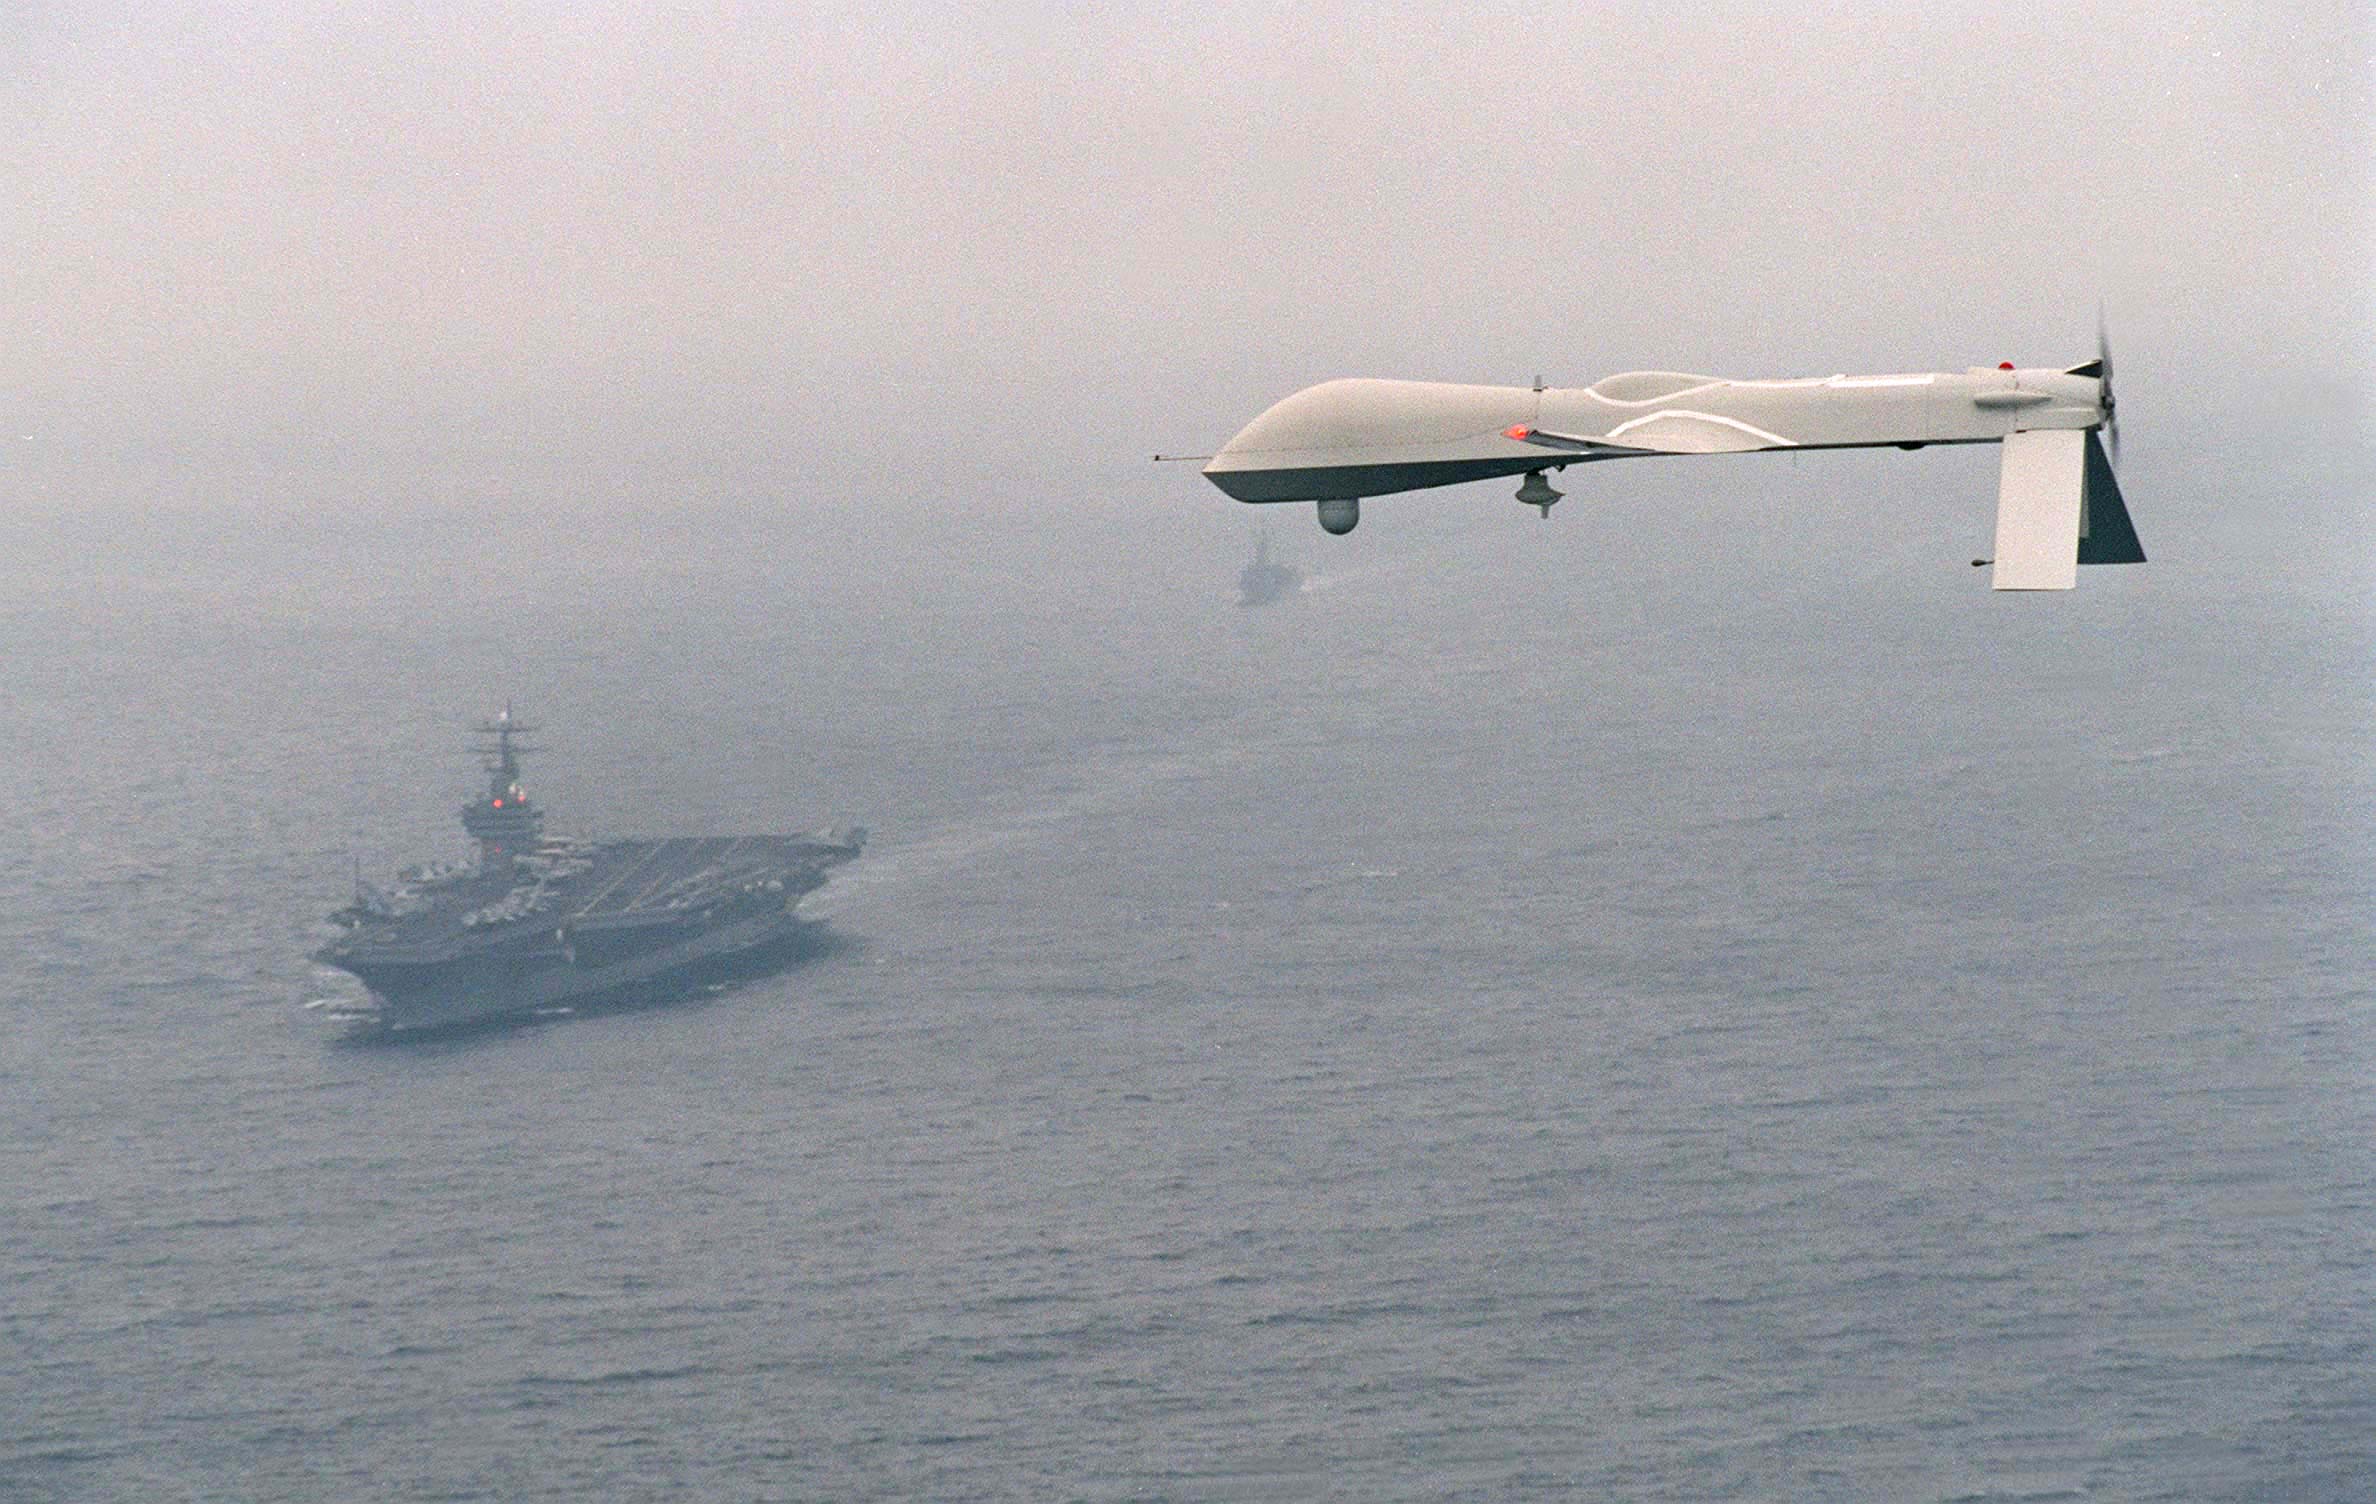 THE PREDATOR UNMANNED AERIAL VEHICLE (UAV) FLIES ABOVE USS CARL VINSON (CVN 70) ON A SIMULATED NAVY RECONNAISSANCE FLIGHT HEADED BY COMMAND CARRIER GROUP ONE ON DECEMBER 5, 1995, ABOUT 100 MILES OFF THE SAN DIEGO COASTLINE. THE FLIGHT IS THE PREDATOR'S FIRST MARITIME MISSION WITH A CARRIER BATTLE GROUP; PROVIDING "NEAR REAL-TIME" INFRARED AND COLOR VIDEO TO THE SHIP DURING ITS FLIGHT. THE PREDATOR, LAUNCHED FROM SAN NICHOLAS ISLAND 0FF THE SOUTHERN CALIFORNIA COASTLINE, IS CAPABLE OF OVER 50 HOURS OF NON-STOP FLIGHT AND IS OPERATED BY A JOINT ARMED SERVICES DETACHMENT. THE DETACHMENT CONSISTS OF A CREW OF MILITARY PILOTS, TECHNICIANS, OPERATORS AND ANALYSTS. THE NAVY'S PLANS FOR THE PREDATOR IN FUTURE EXERCISES AND OPERATIONS INCLUDE SHIP RECONNAISSANCE, BATTLE-DAMAGE ASSESSMENT, AND SEARCH AND RESCUE MISSIONS. PREDATOR HAS A WINGSPAN OF 48.4 FEET, A LENGTH OF 26.7 FEET AND WEIGHS APPROXIMATELY 1500 POUNDS WHEN FULLY FUELED. COST OF THE AIRCRAFT IS AROUND 3.2 MILLION DOLLARS. AVERAGE SPEED IS APPROXIMATELY 70 KNOTS.